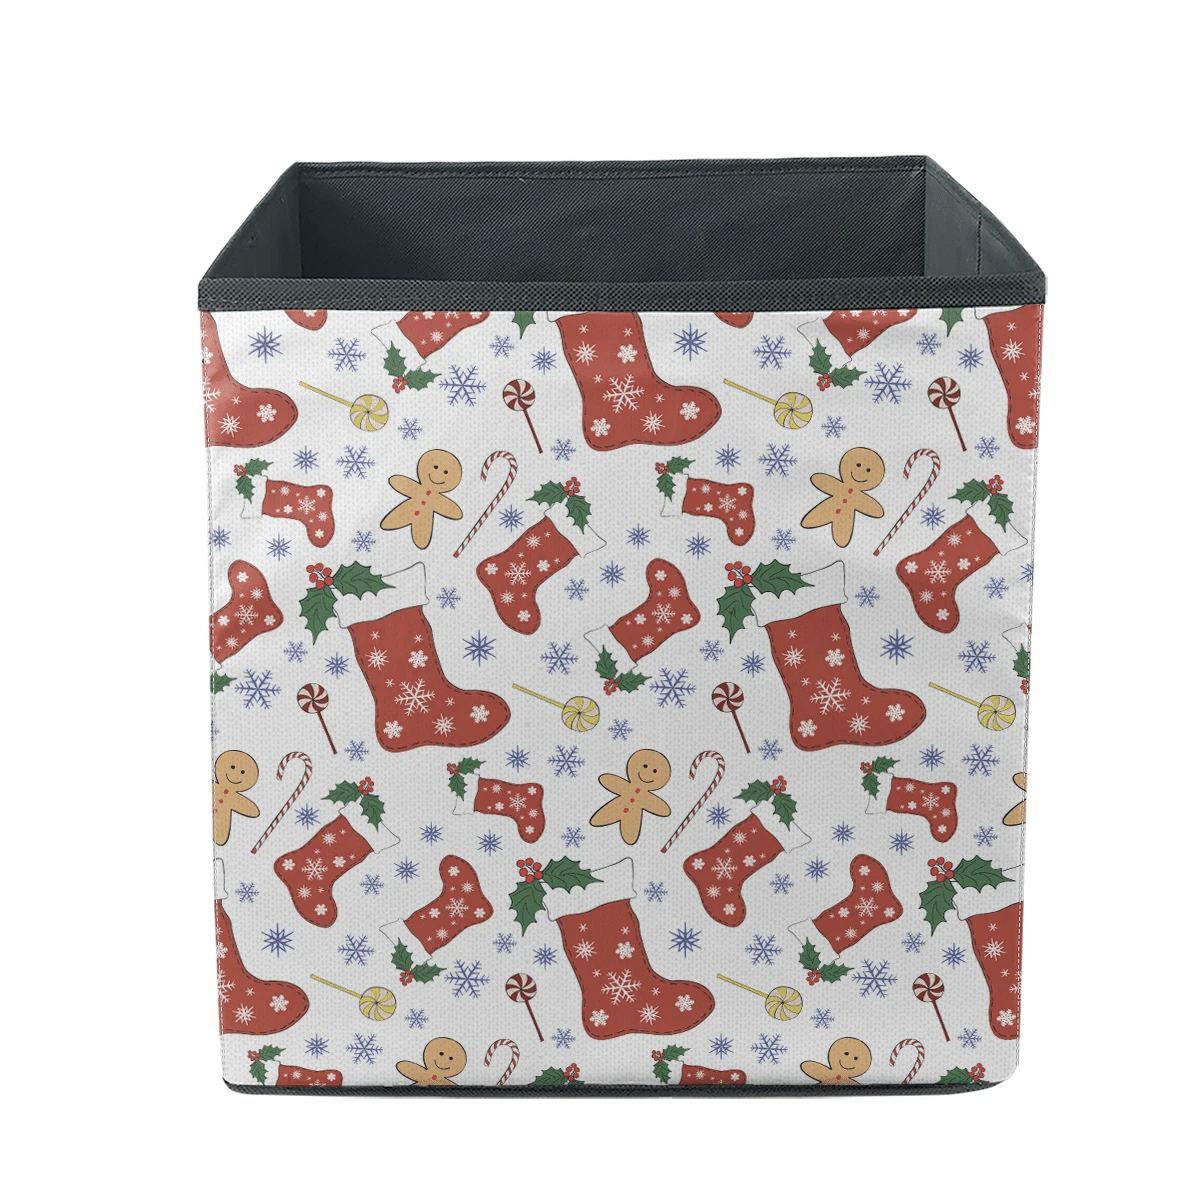 Red Socks With Snowflake Biscuits And Christmas Candies Cane Storage Bin Storage Cube